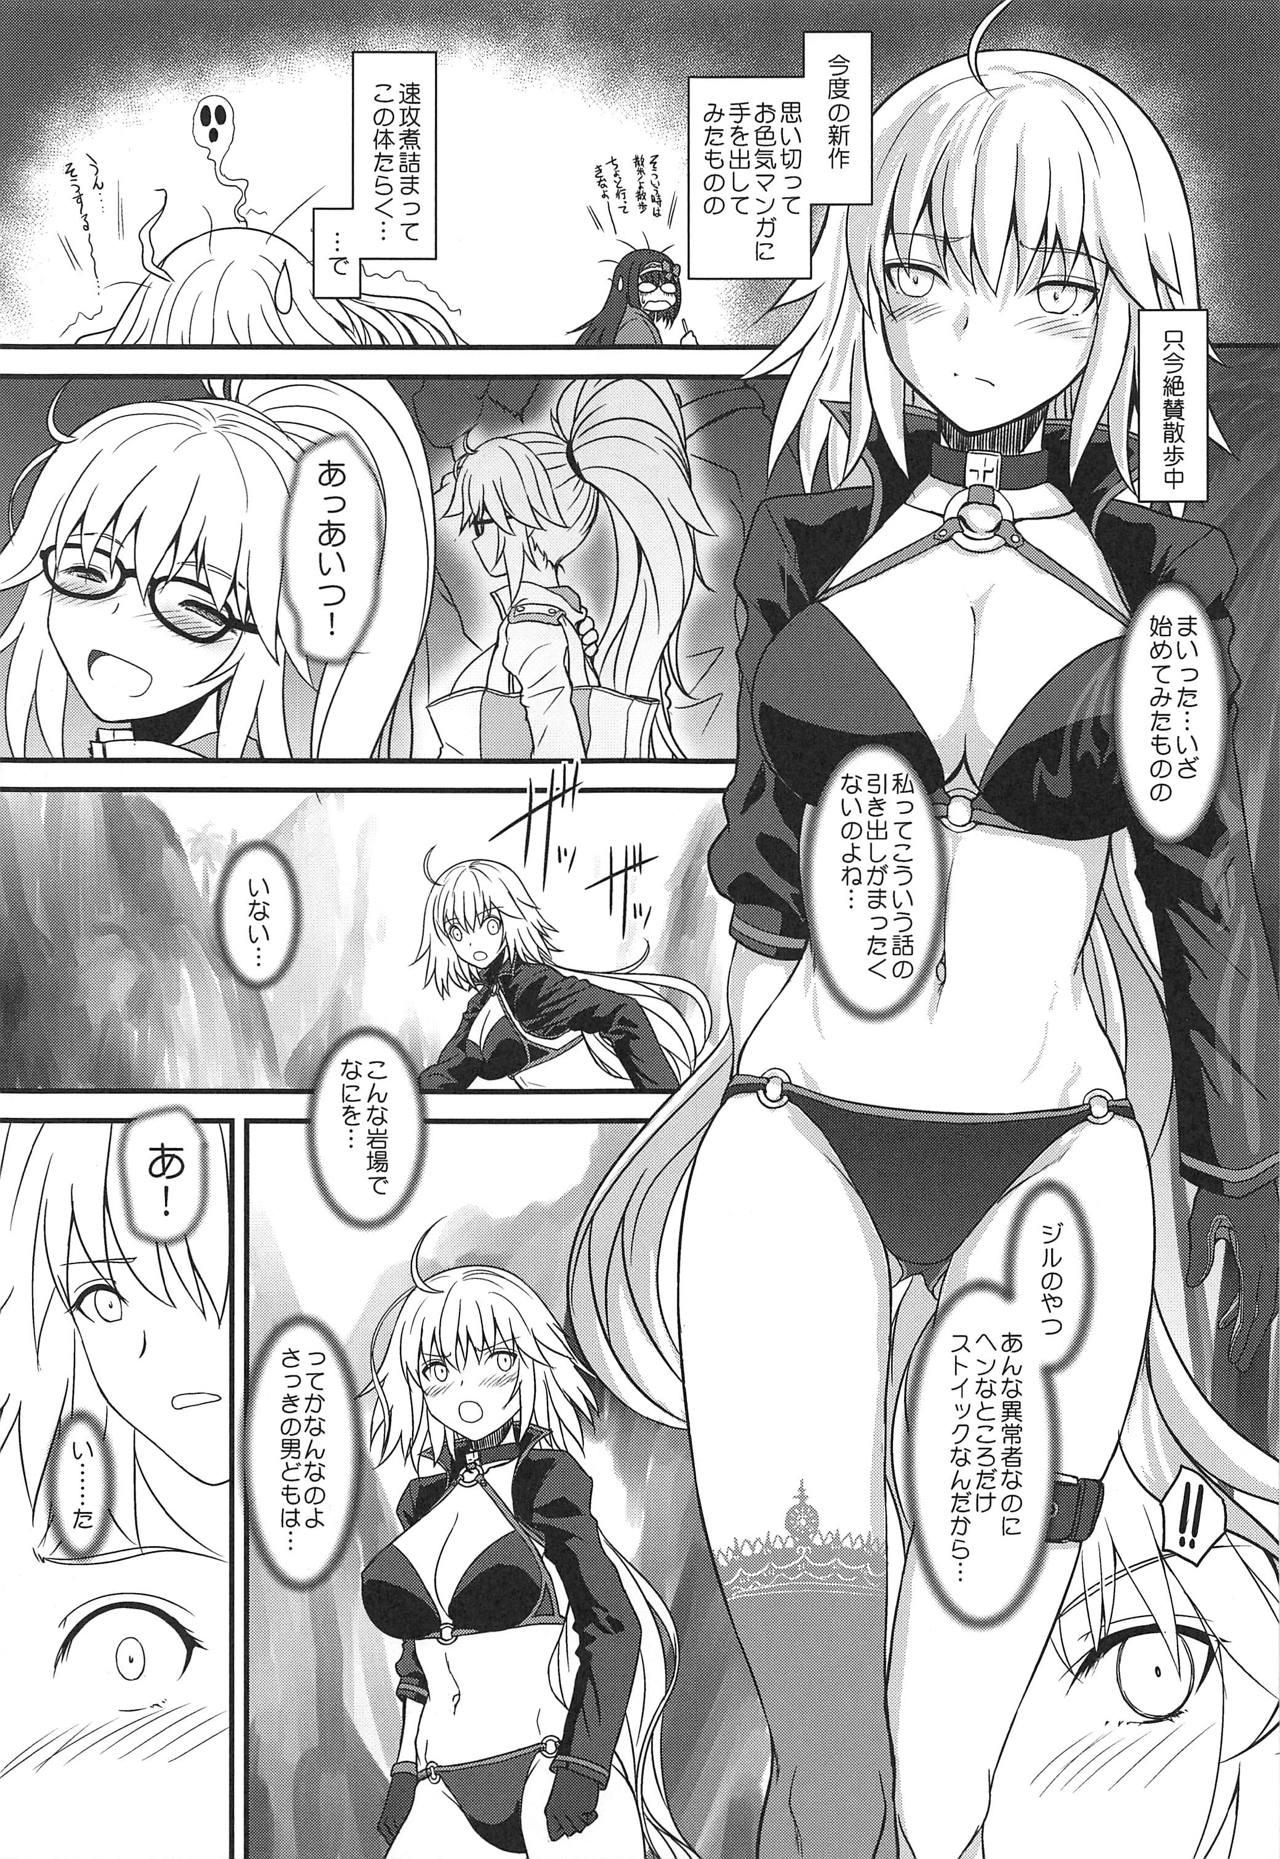 Nasty Free Porn Am i Evil? - Fate grand order Latin - Page 4